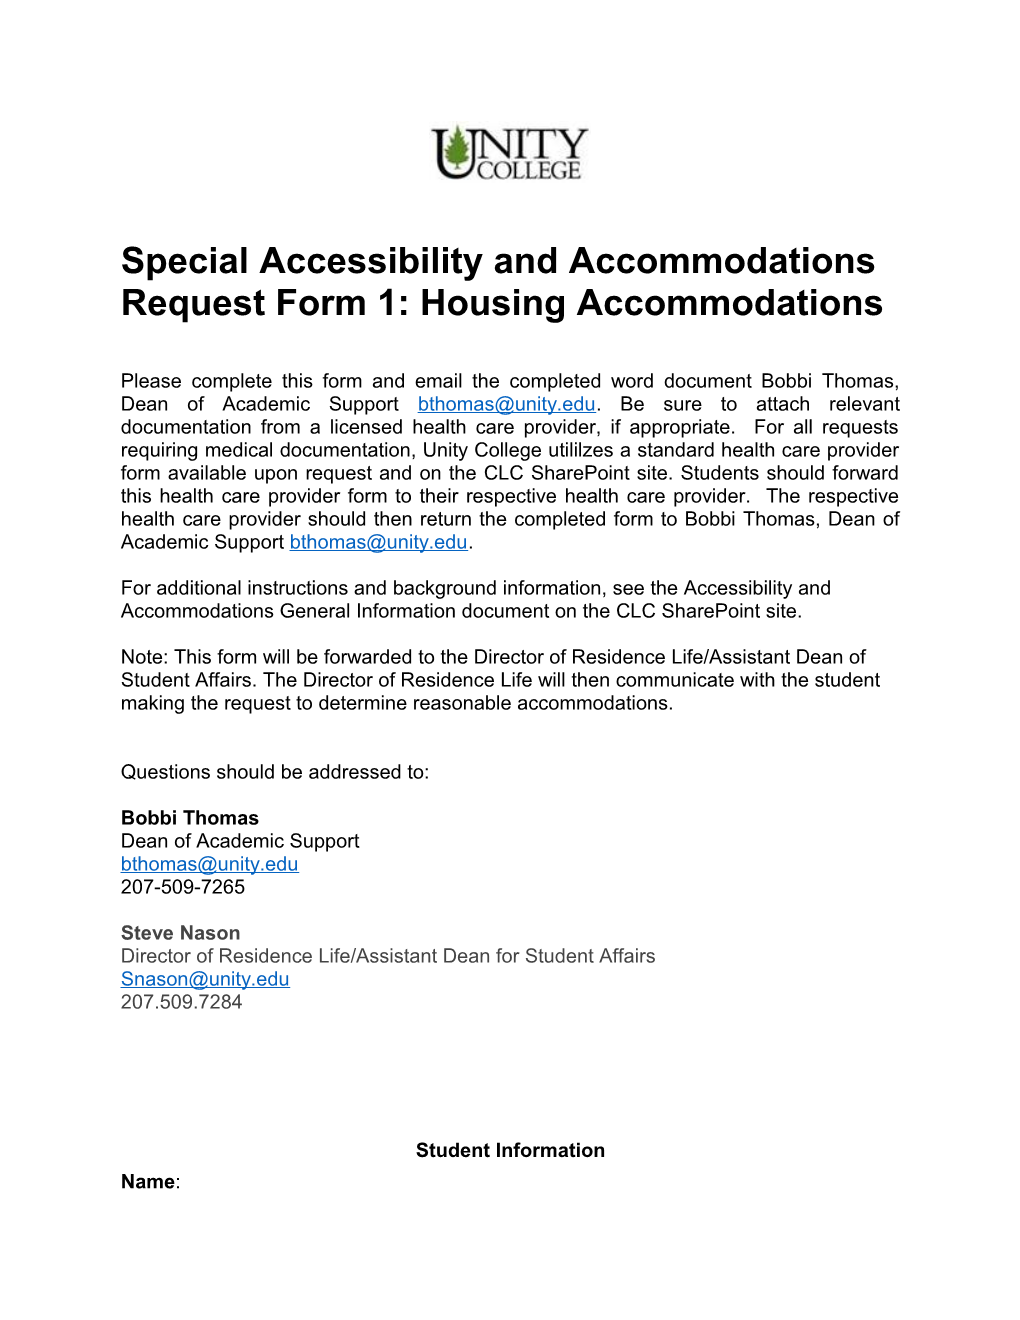 Special Accessibility and Accommodations Request Form 1: Housing Accommodations